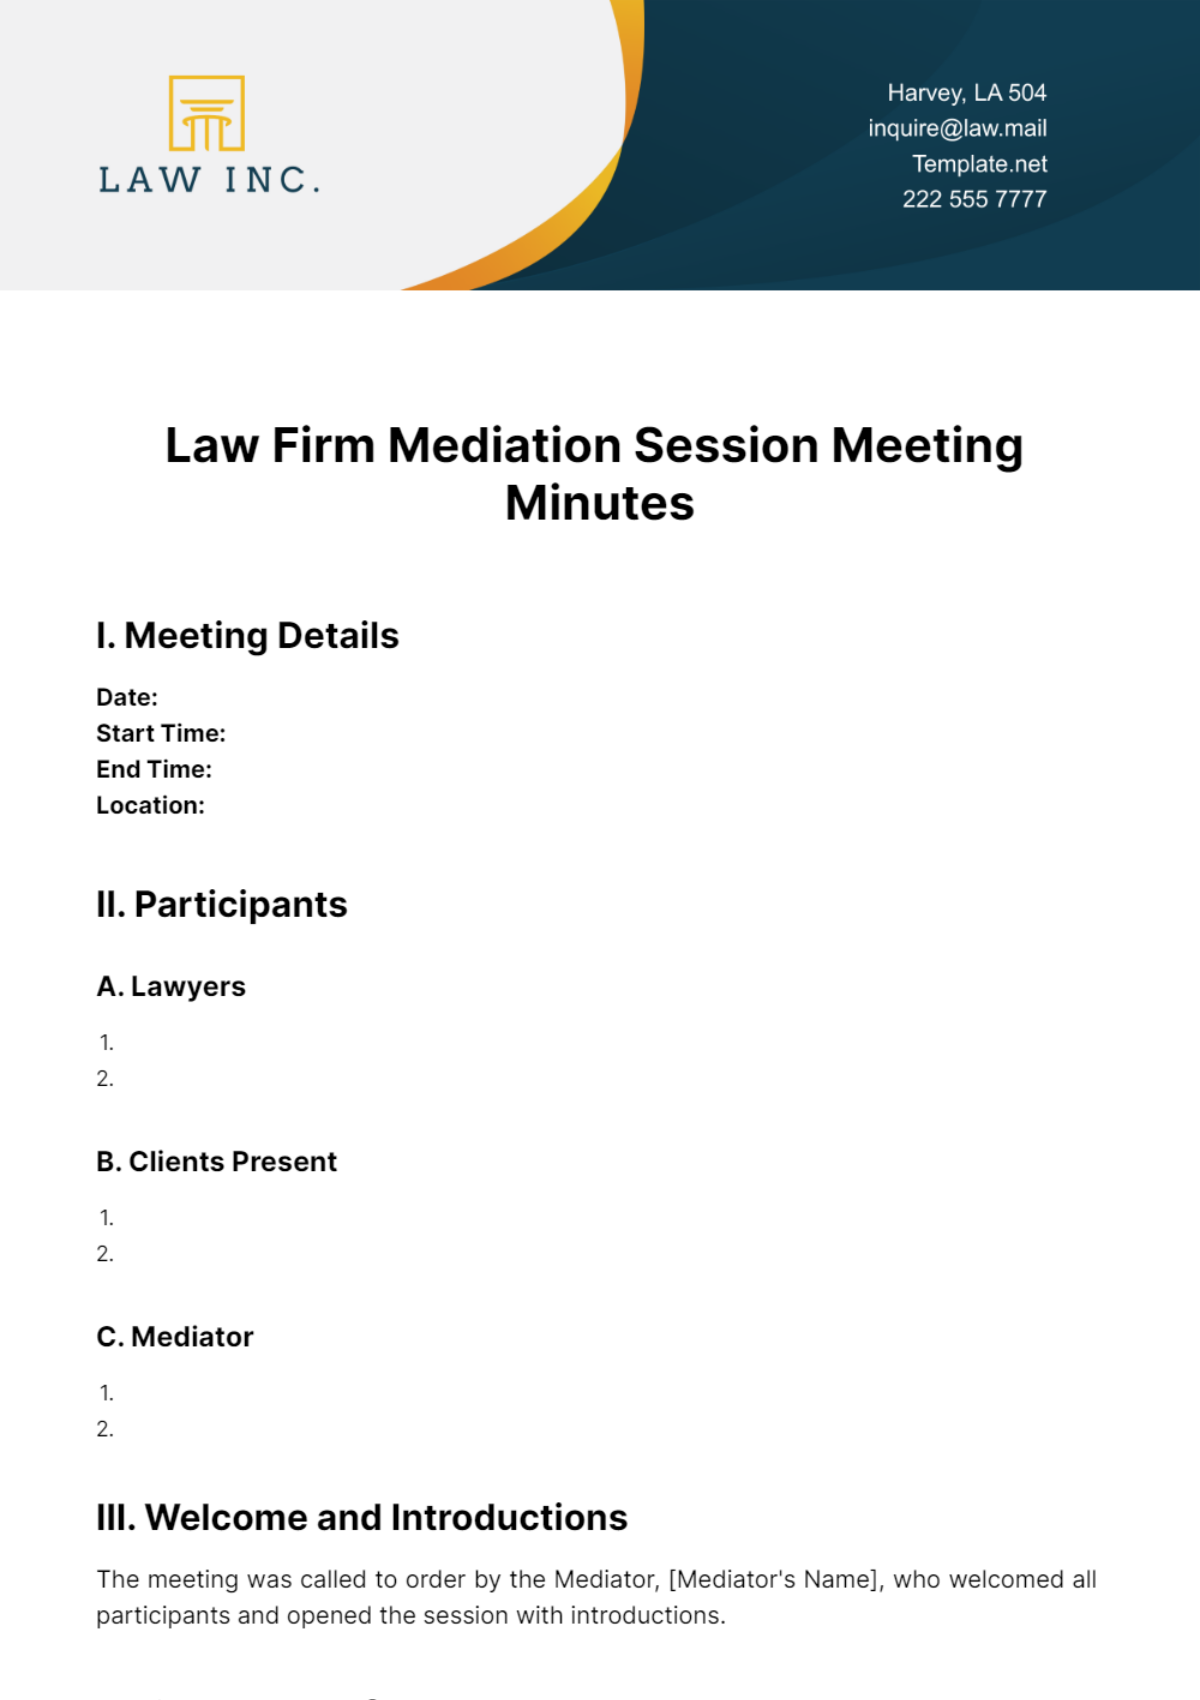 Law Firm Mediation Session Meeting Minutes Template